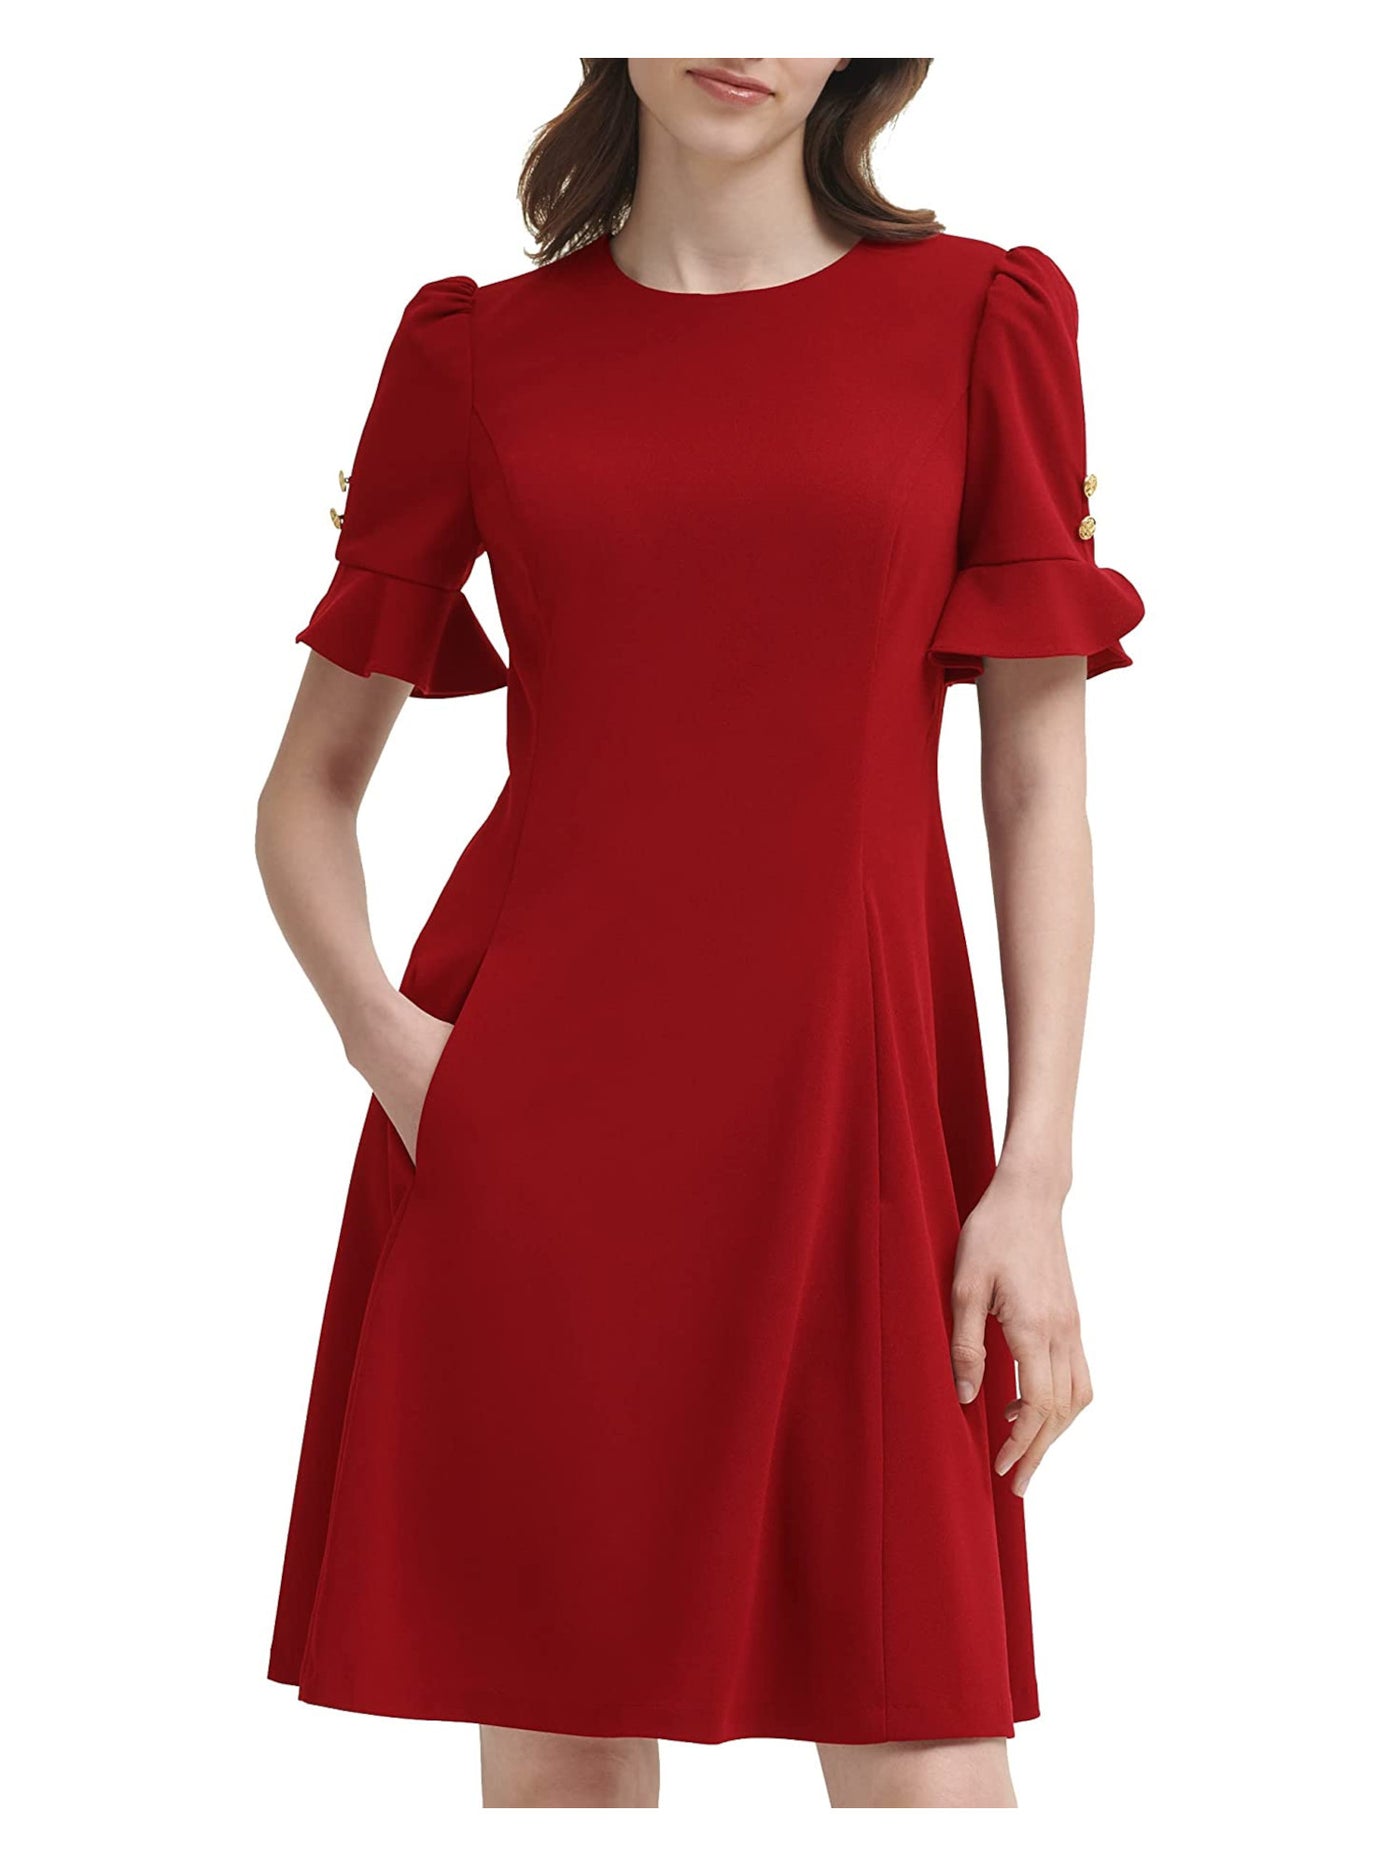 DKNY Womens Red Stretch Pocketed Zippered Ruffled Button Detail Pouf Sleeve Crew Neck Above The Knee Wear To Work Fit + Flare Dress 16